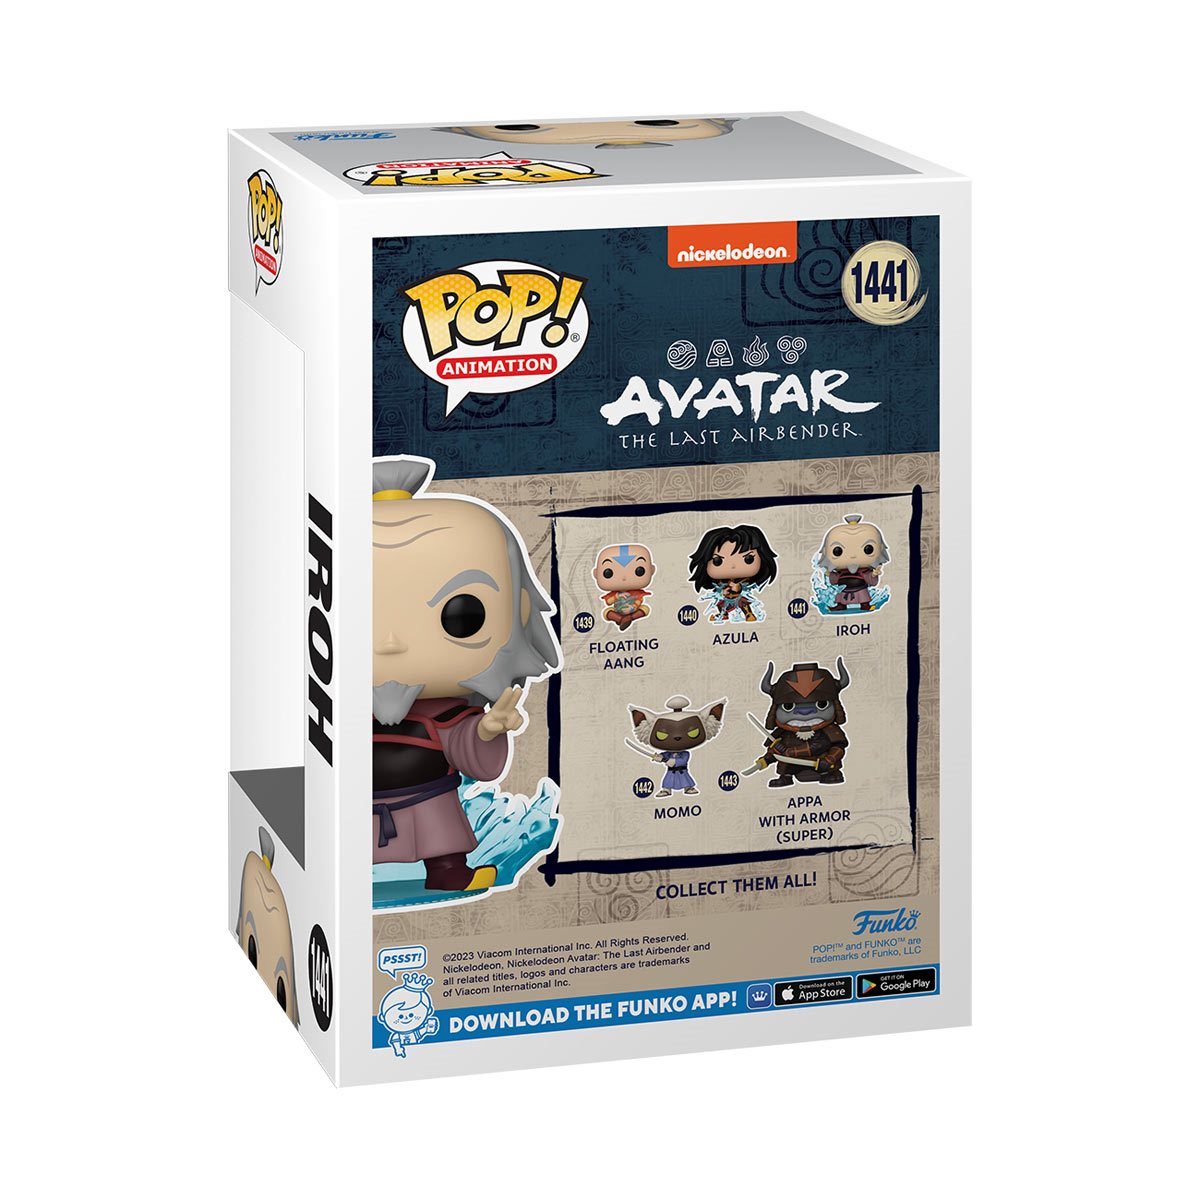 Avatar: The Last Airbender Iroh with Lightning Funko Pop! Vinyl Figure - Hyperdrive Collector Zone